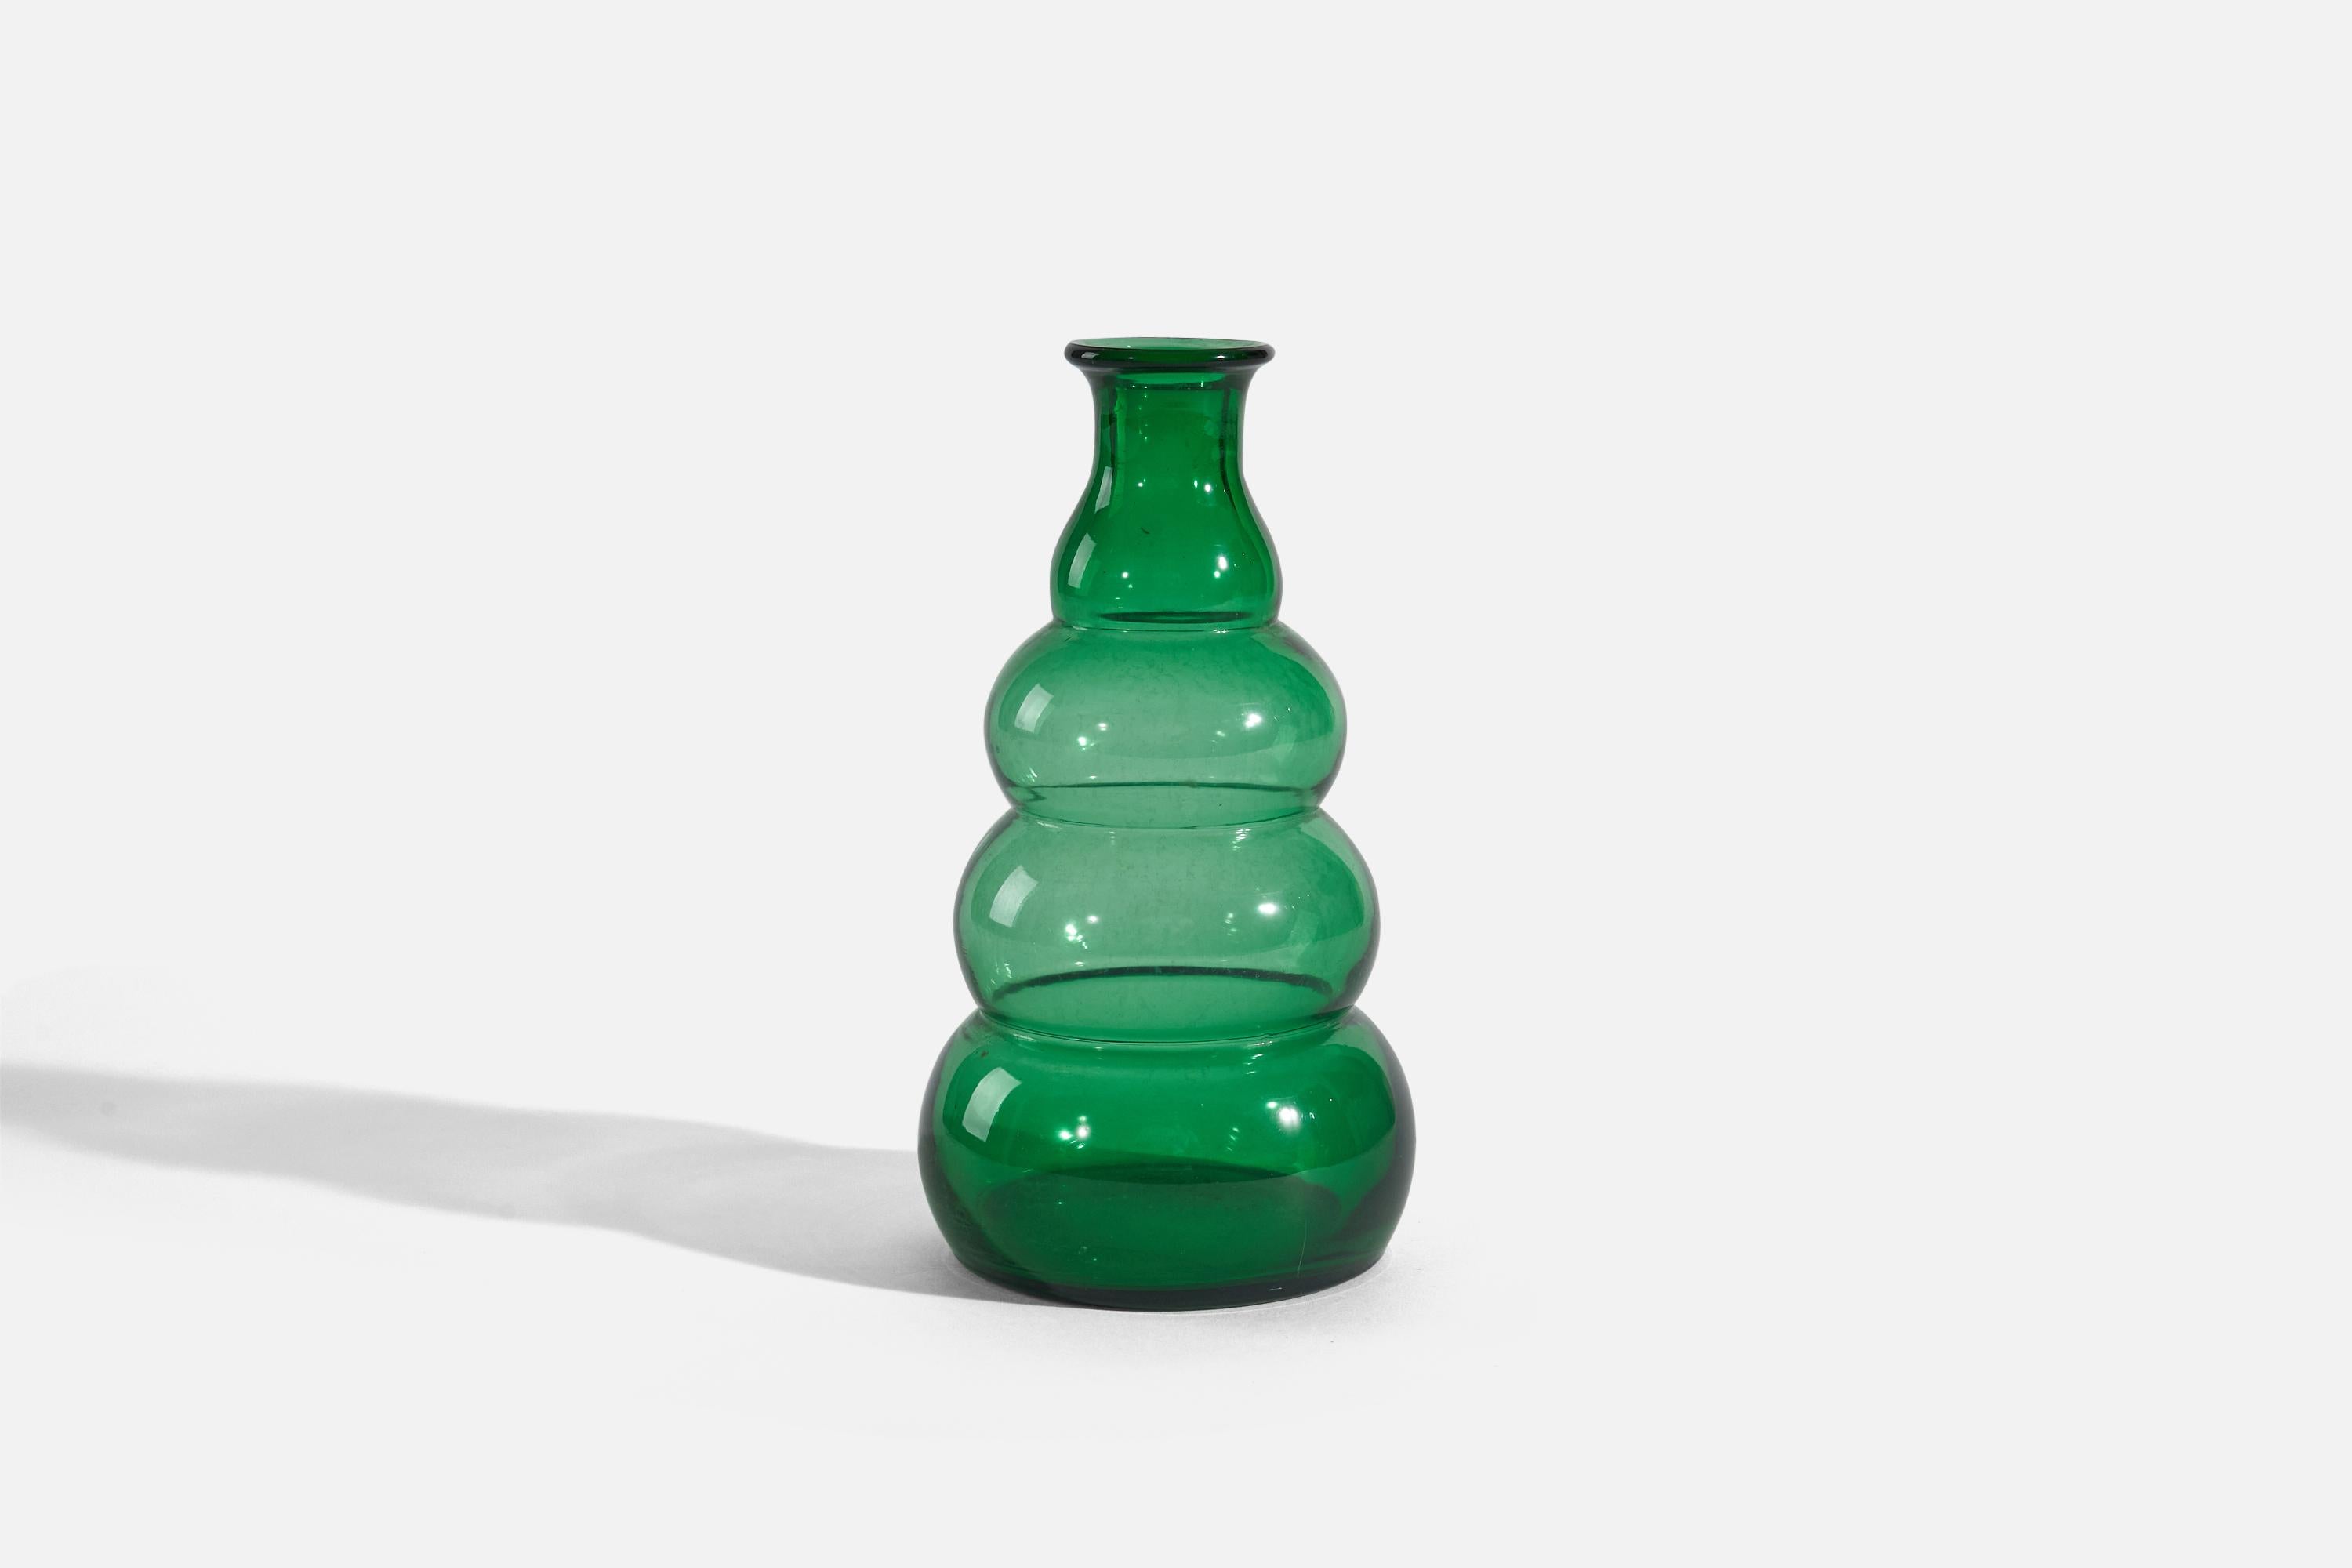 A green glass vase designed by Edvin Ollers and produced by Limmareds Glasbruk, Sweden, c. 1940s.